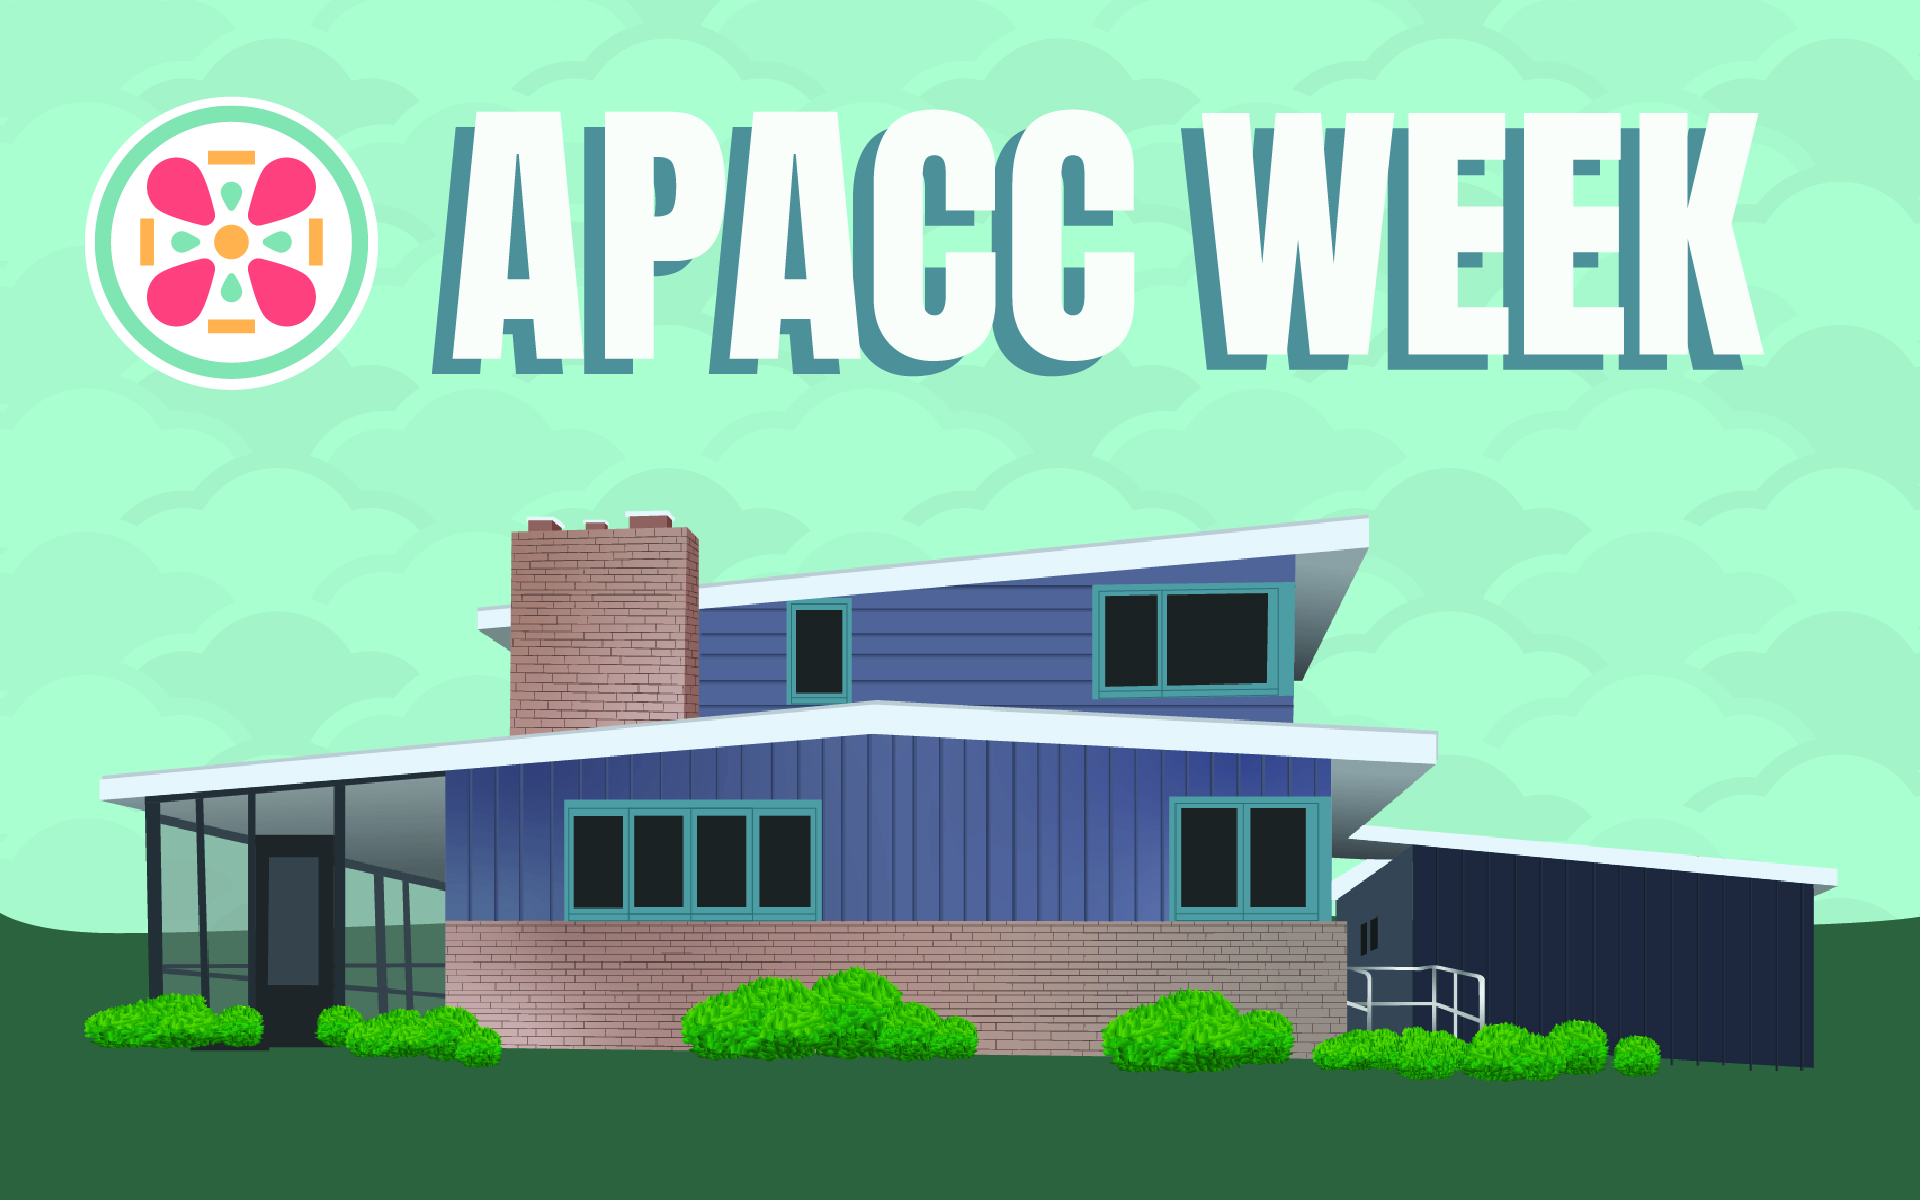 illustration with building with text APACC week